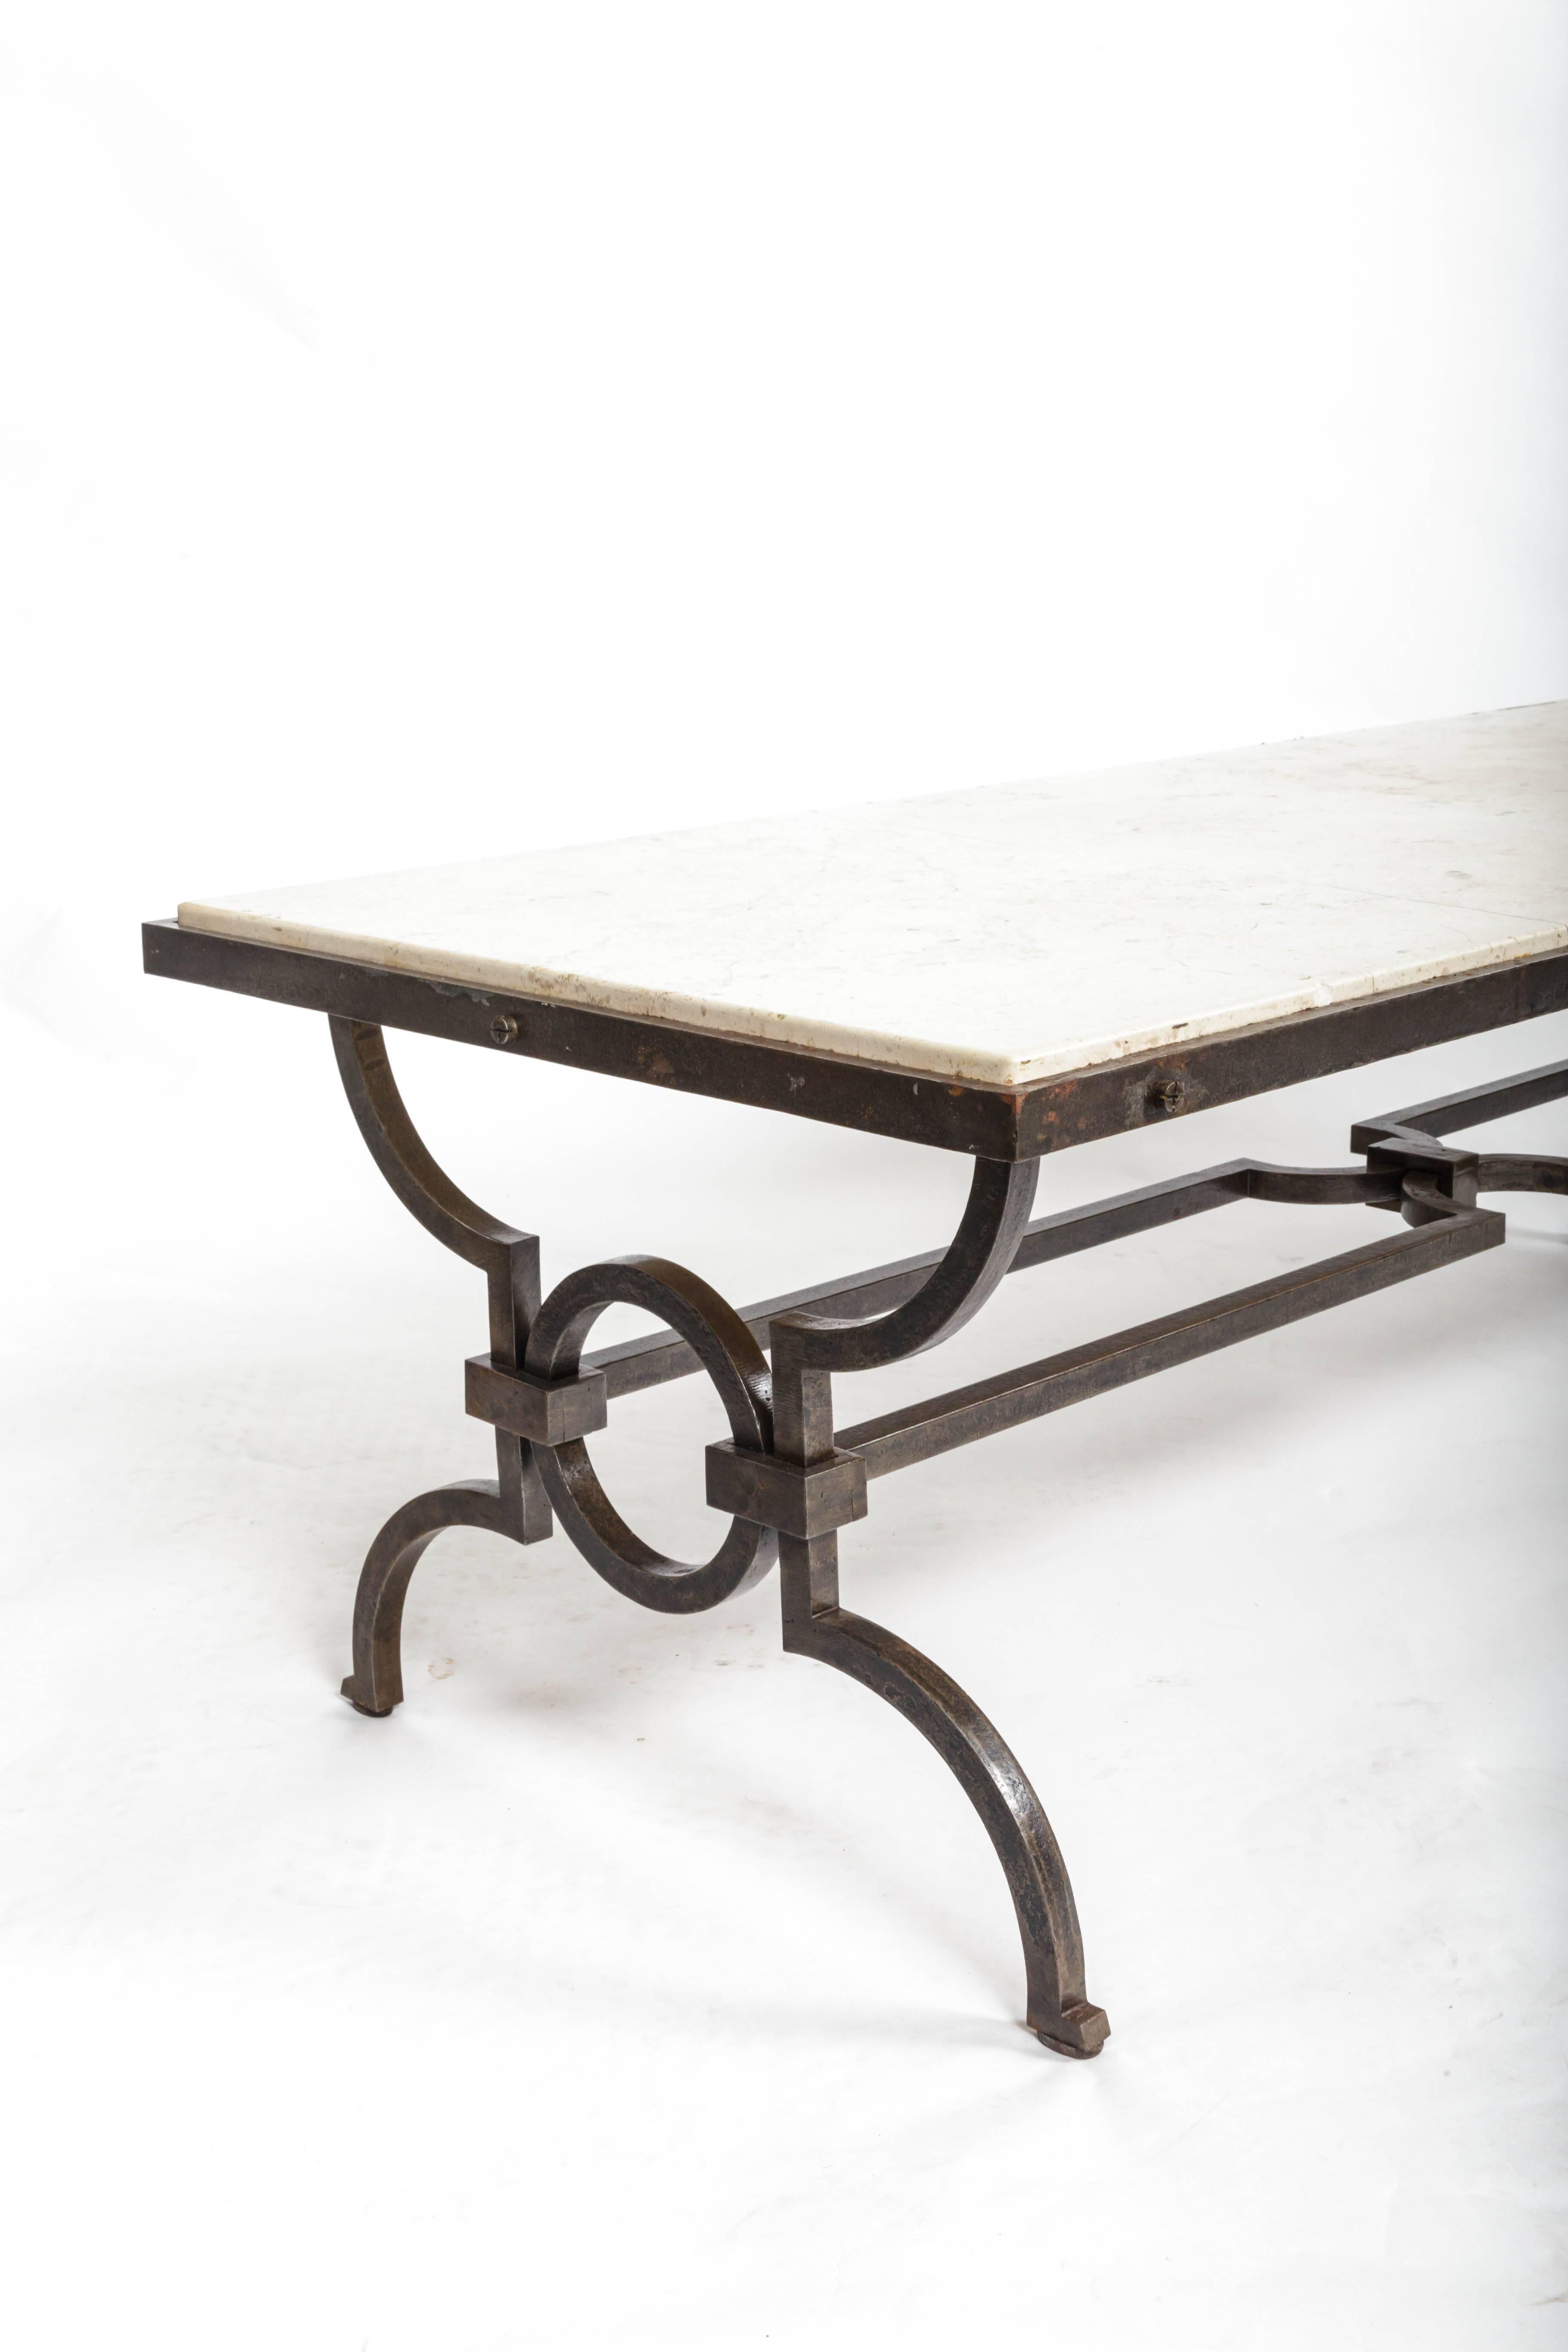 Mid-20th Century Black Patinated and Gilded Wrought Iron Coffee Table by Gilbert Poillerat, Franc For Sale